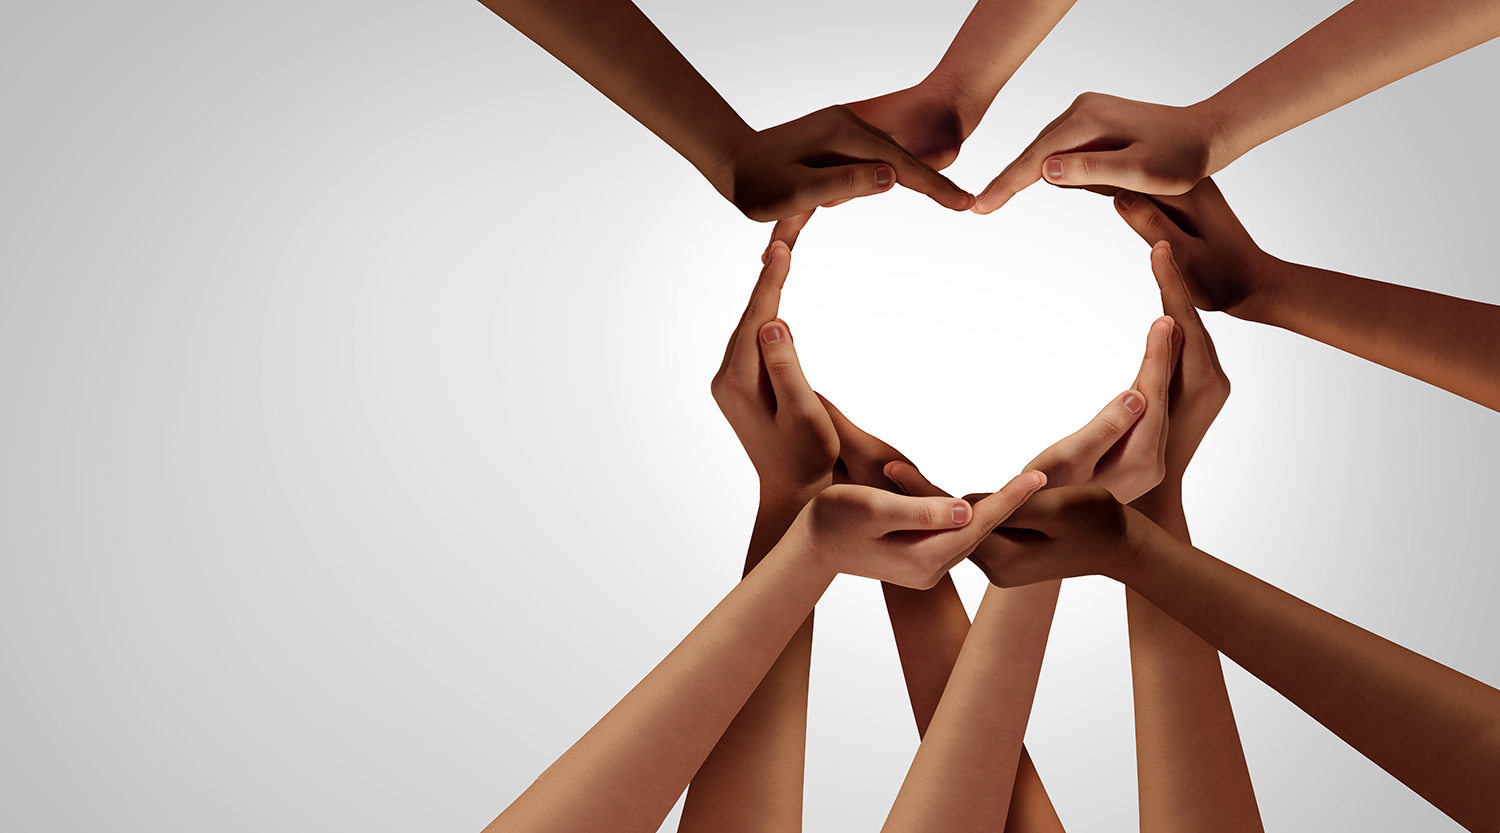 A group of people hold their hands together to form a heart shape.